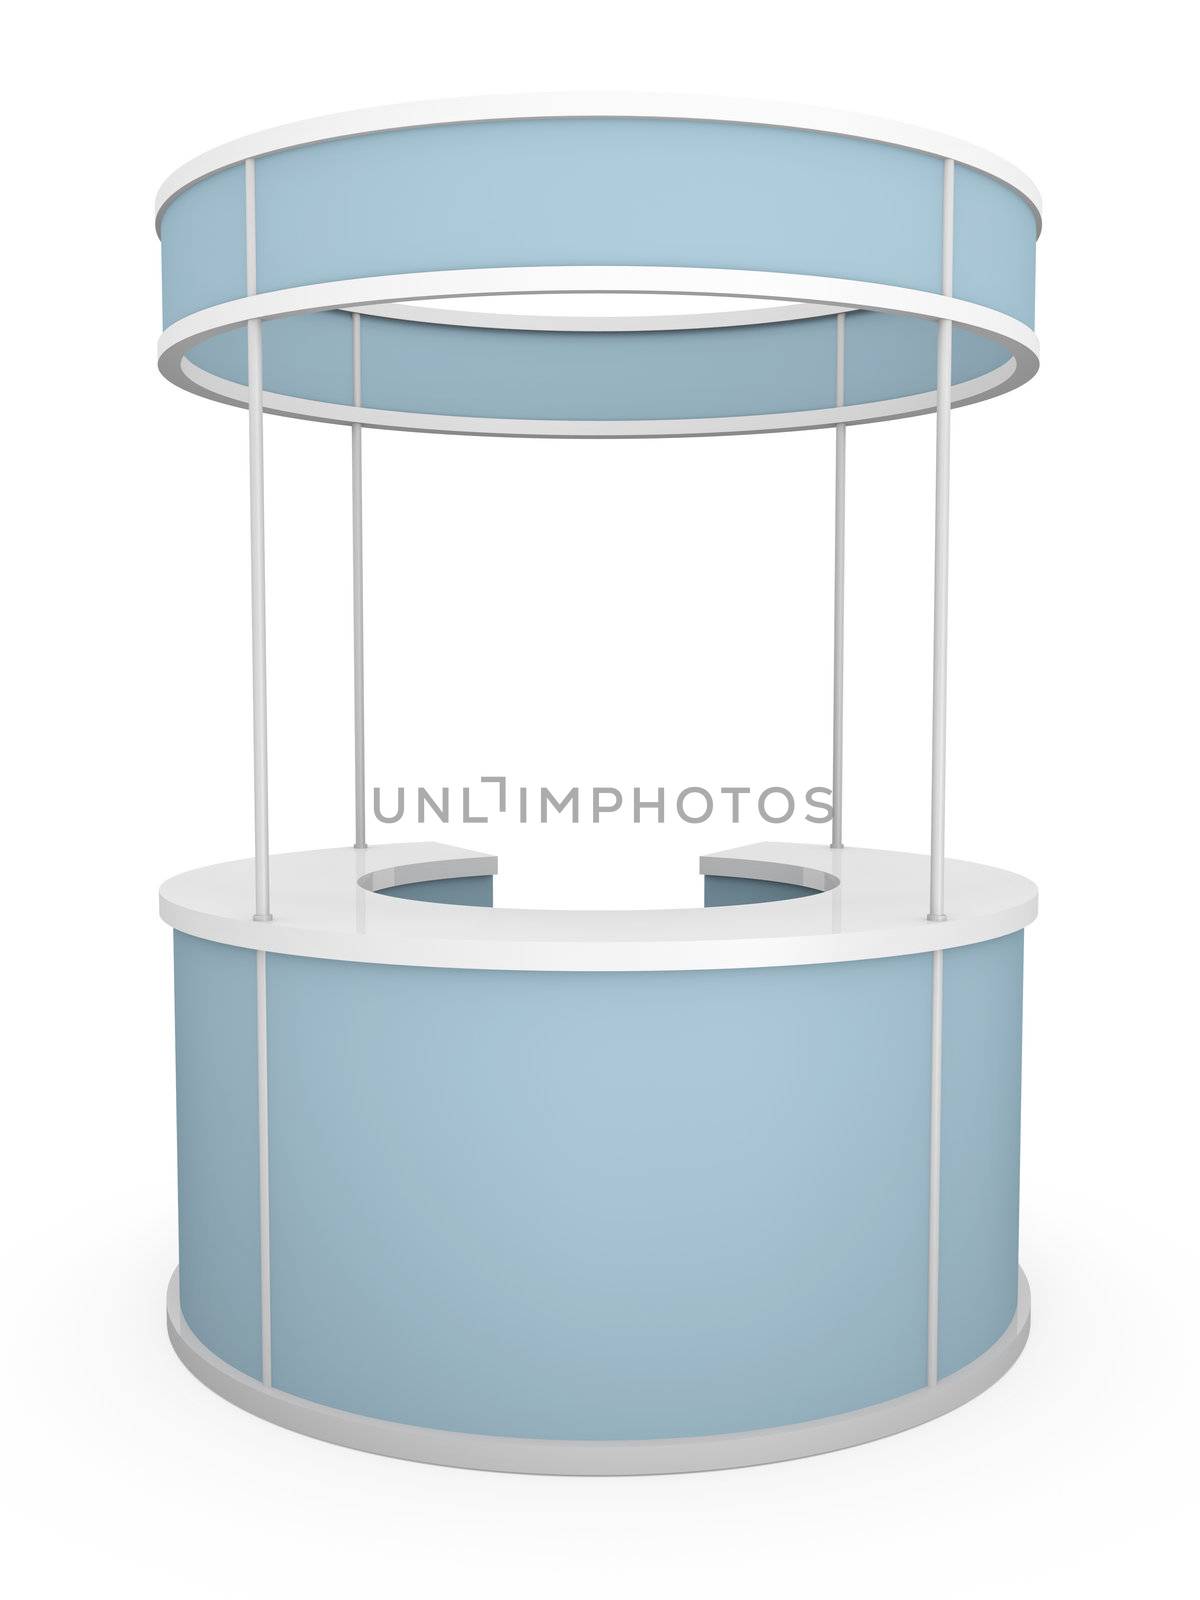 Rounded trade stand. 3D rendered illustration.